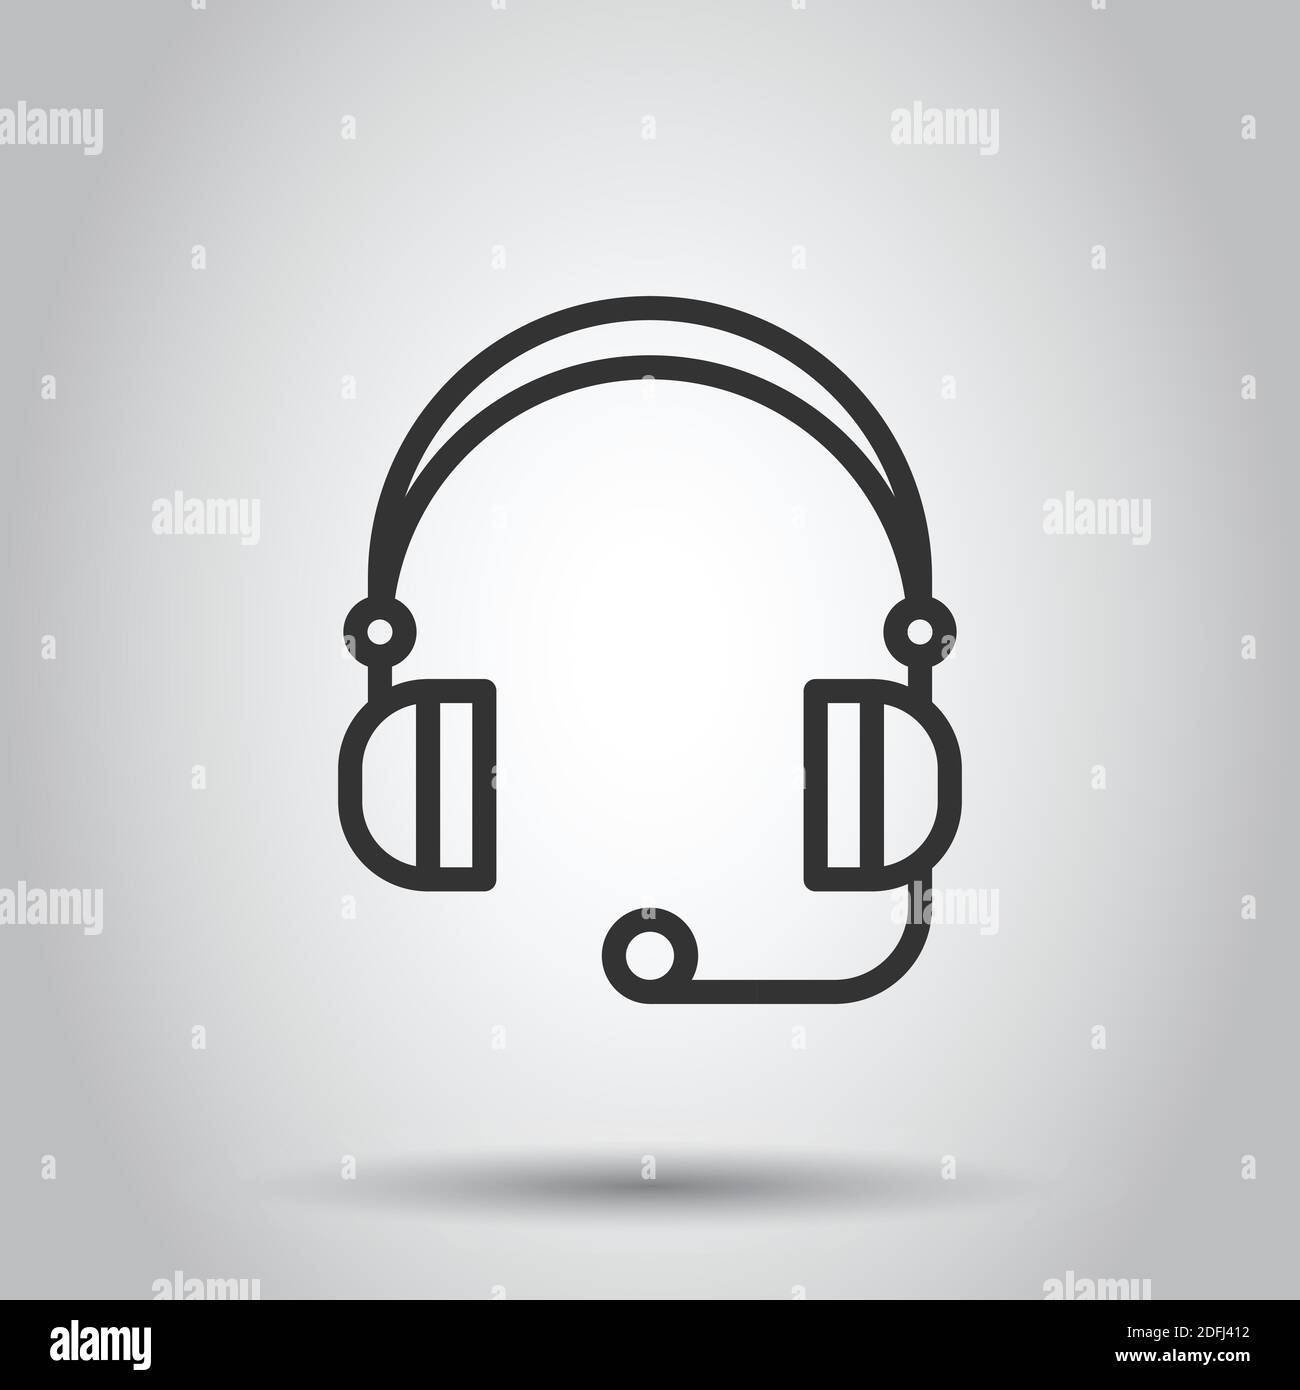 Helpdesk icon in flat style. Headphone vector illustration on white isolated background. Chat operator business concept. Stock Vector